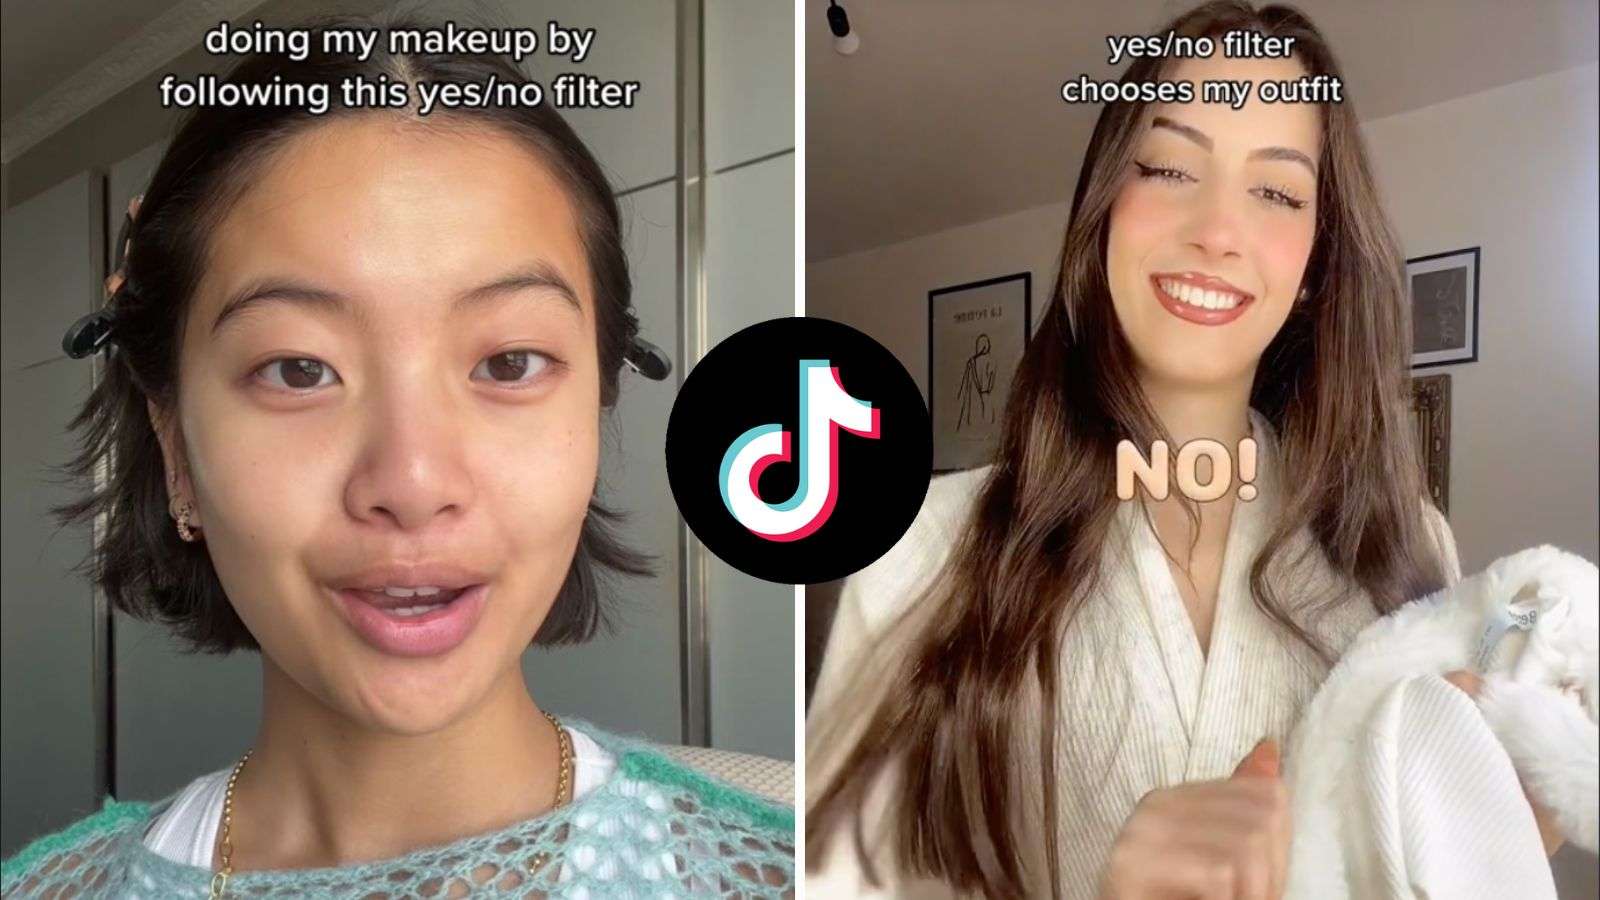 How to get the ‘yes or no’ filter on TikTok